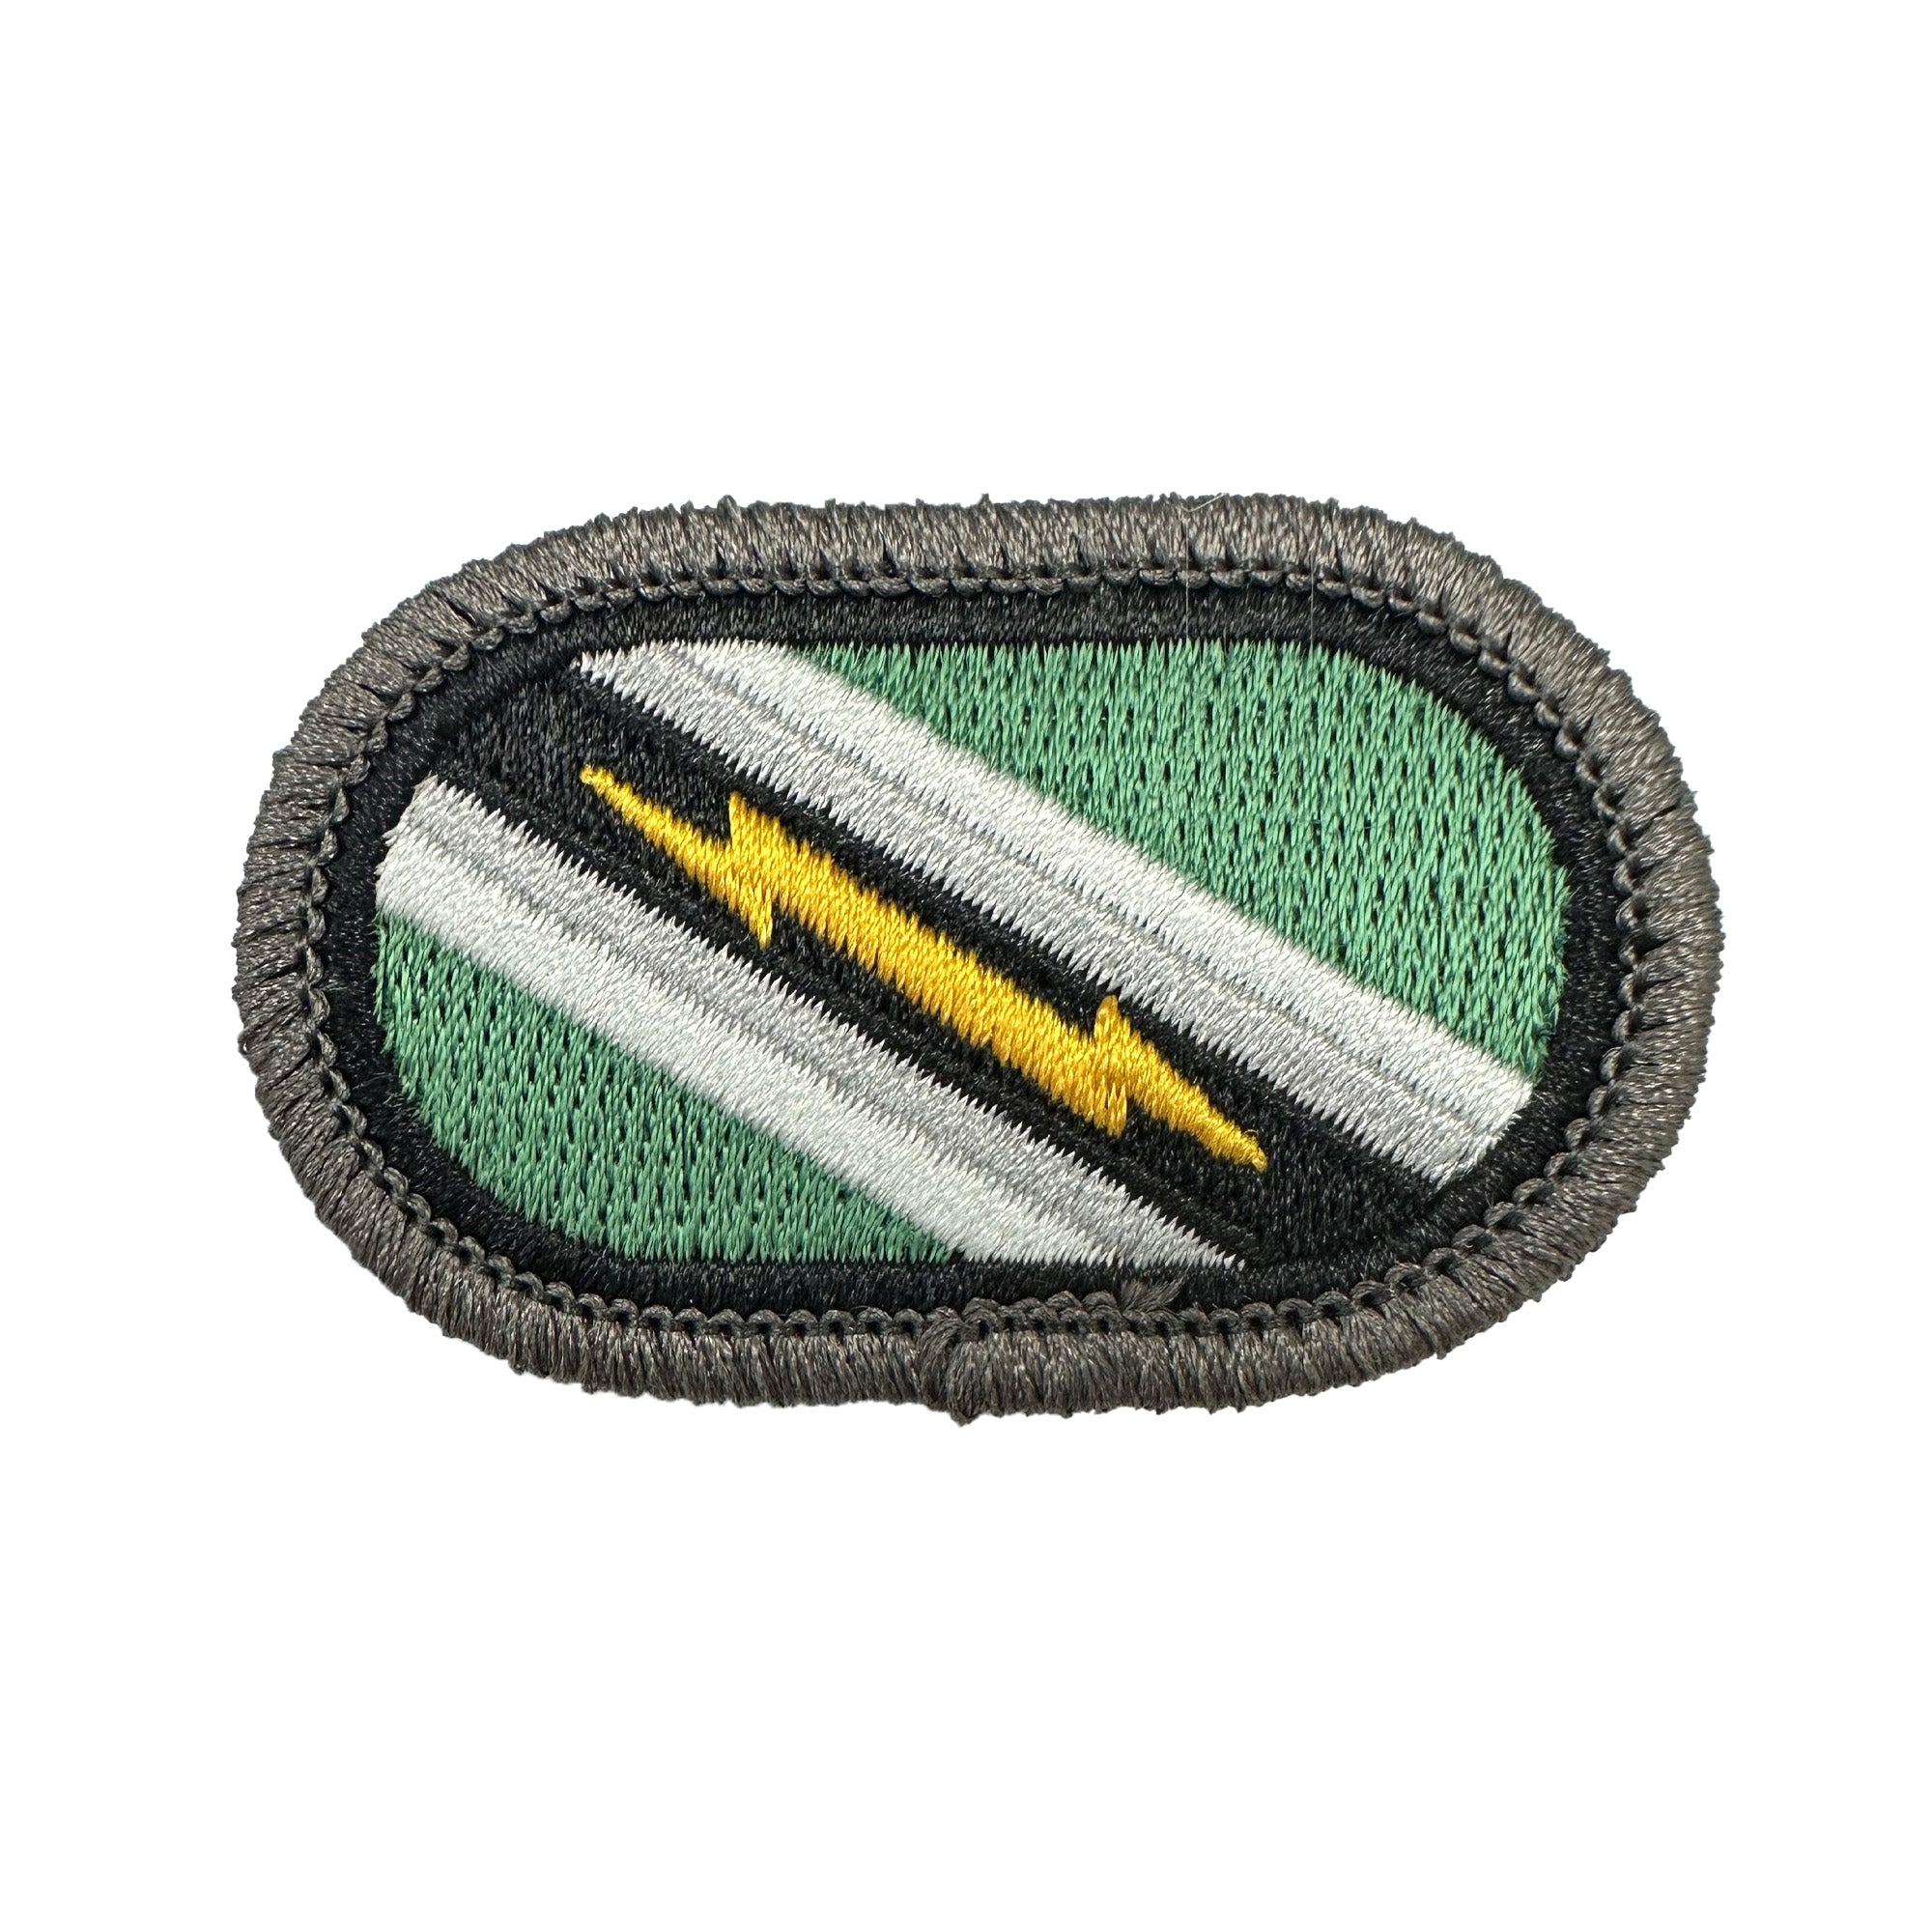 8th Psychological Operations Group Oval (each).